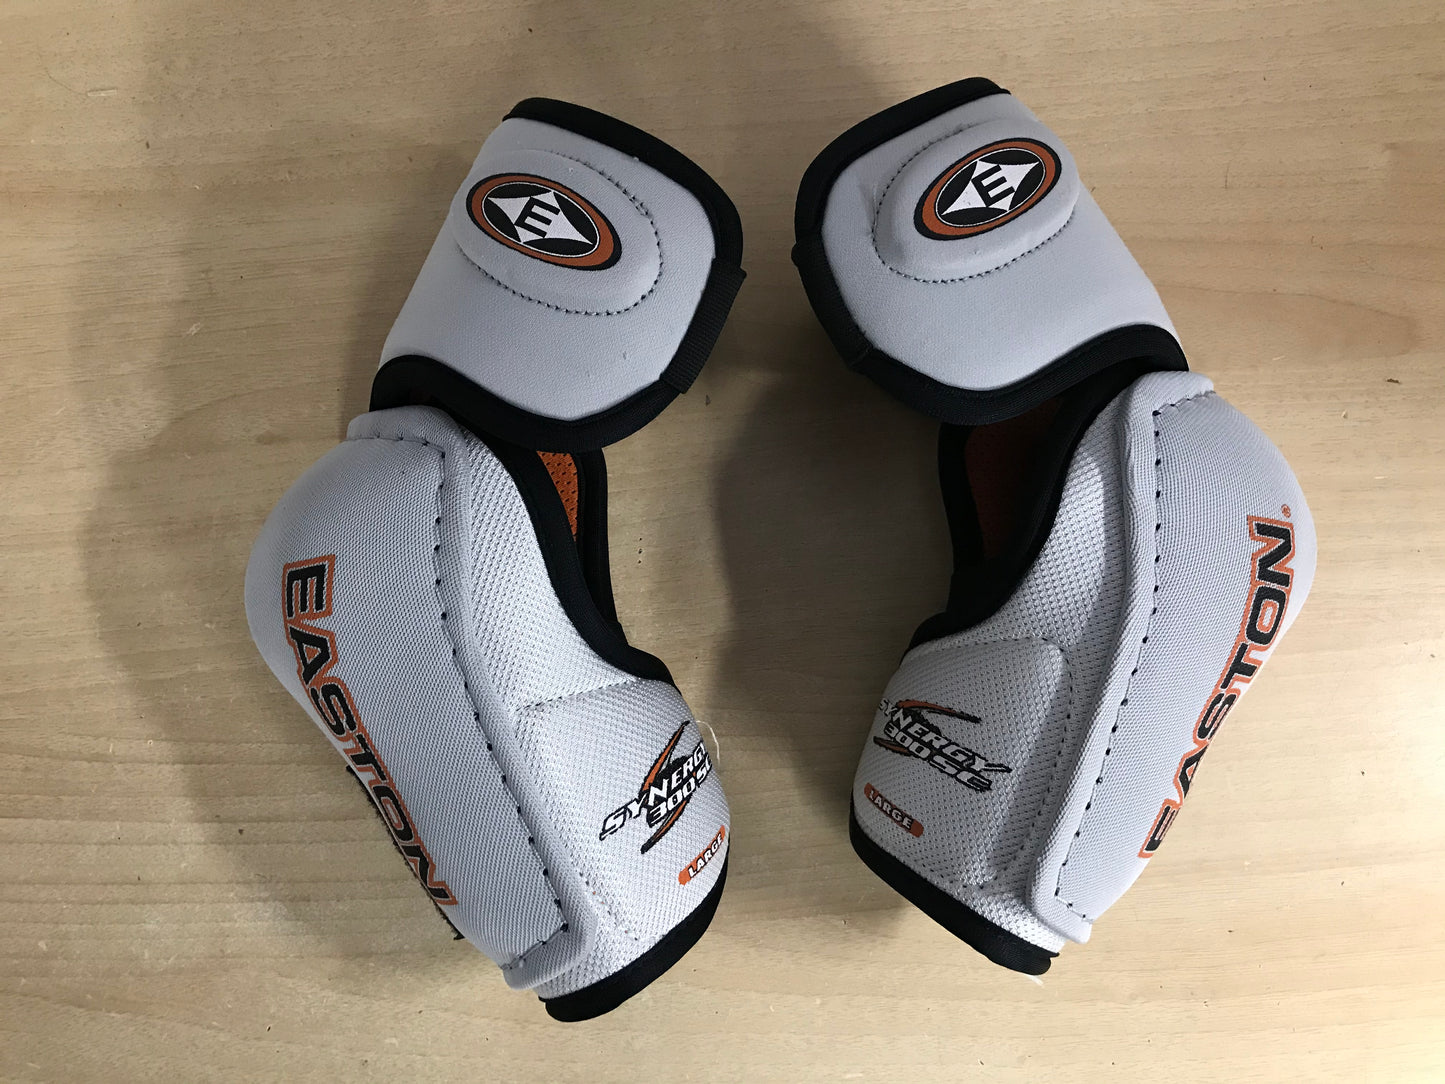 Hockey Elbow Pads Child Size Junior Large Easton Synergy Black Grey Excellent